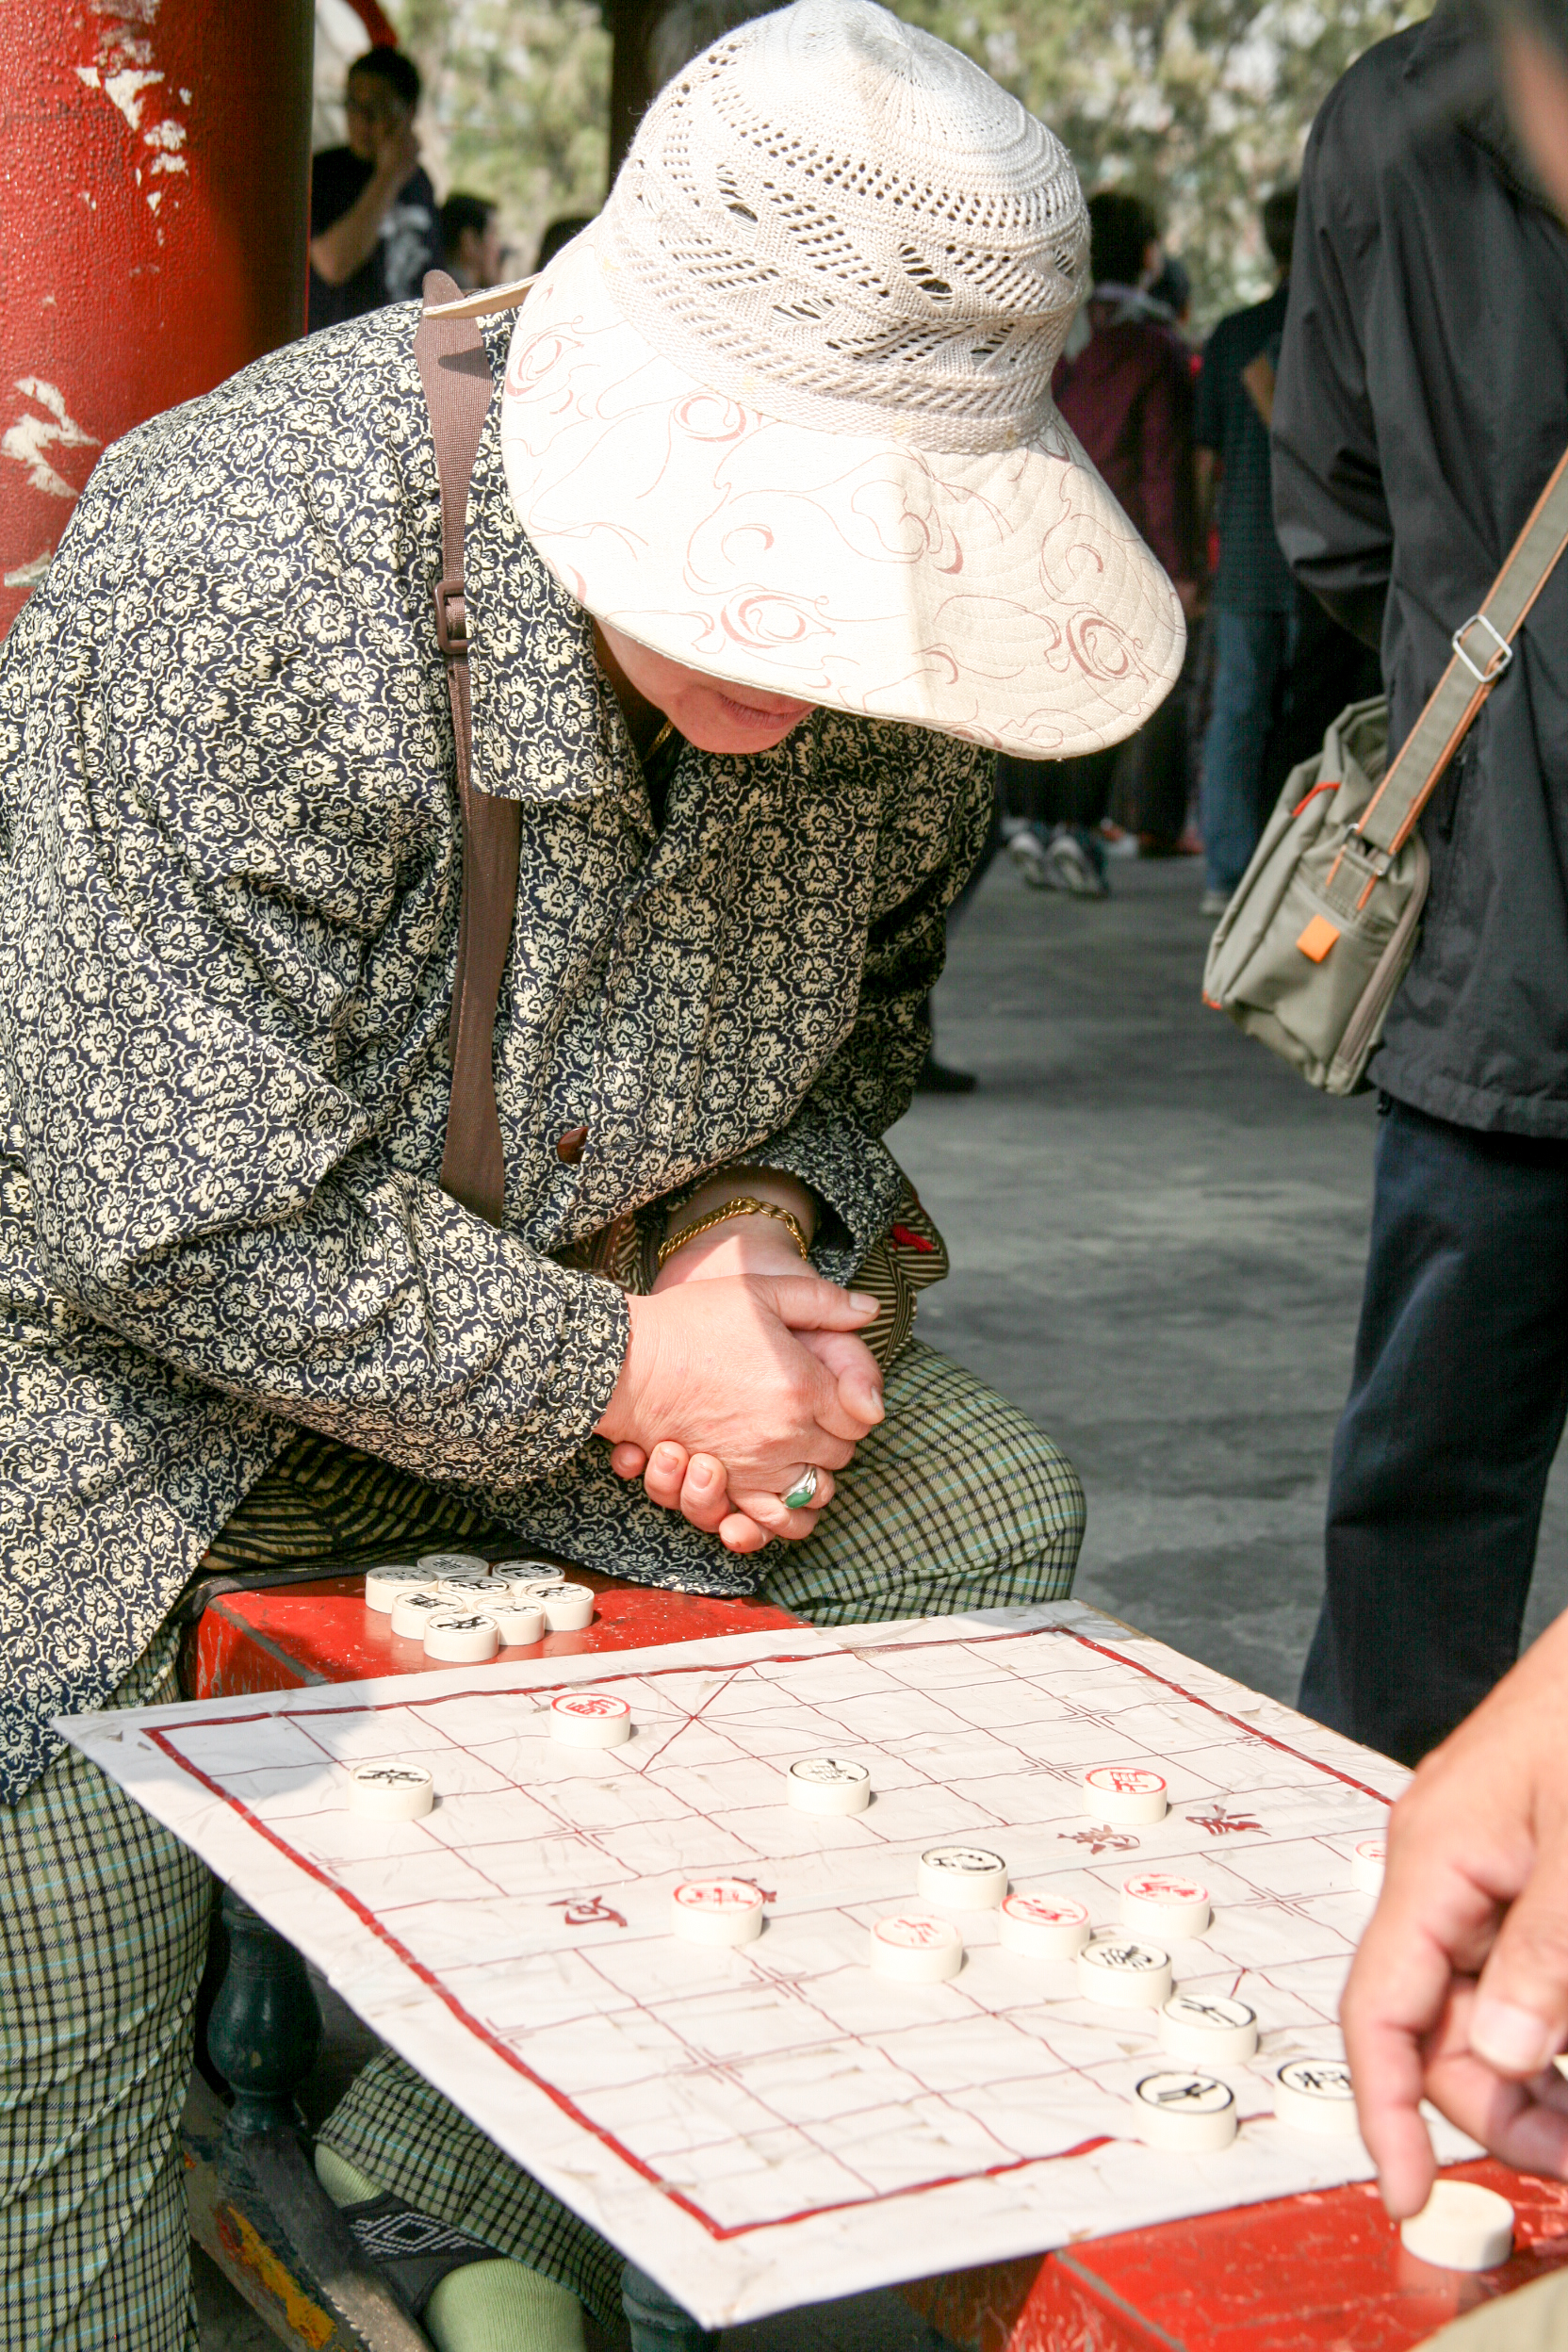 Board games in the park, Beijing, China